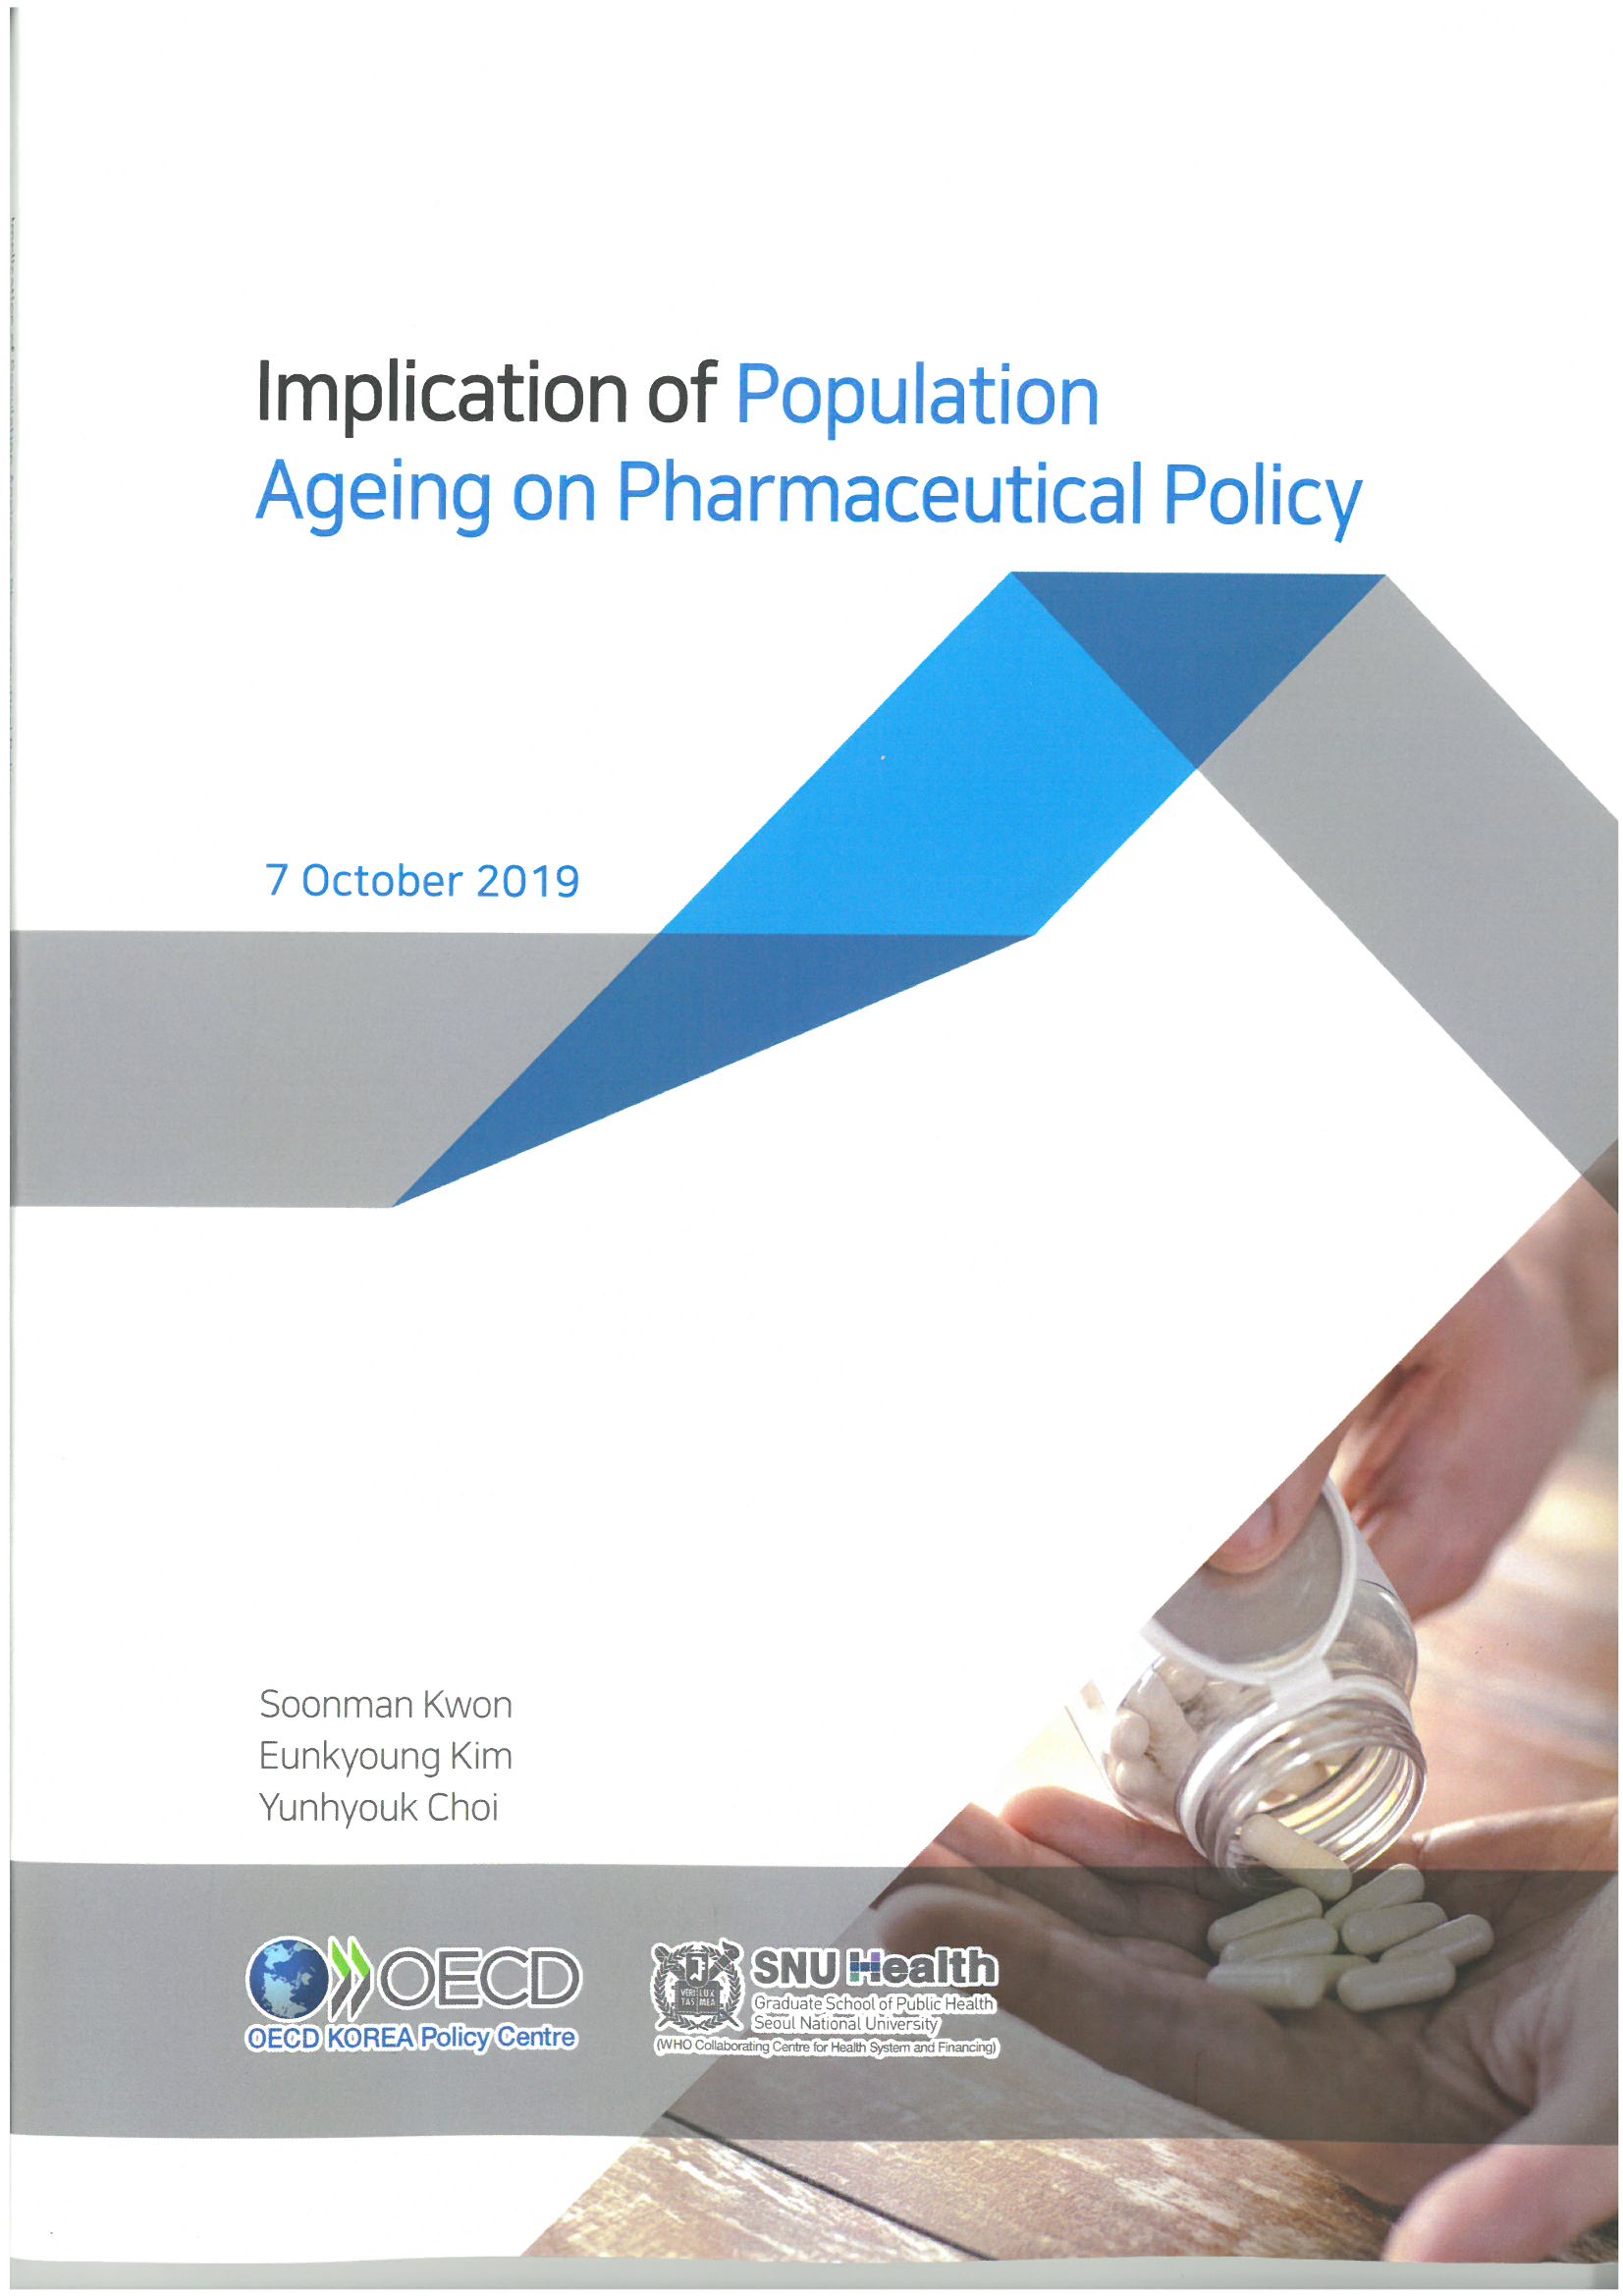 Implication of Population Ageing on Pharmaceutical Policy